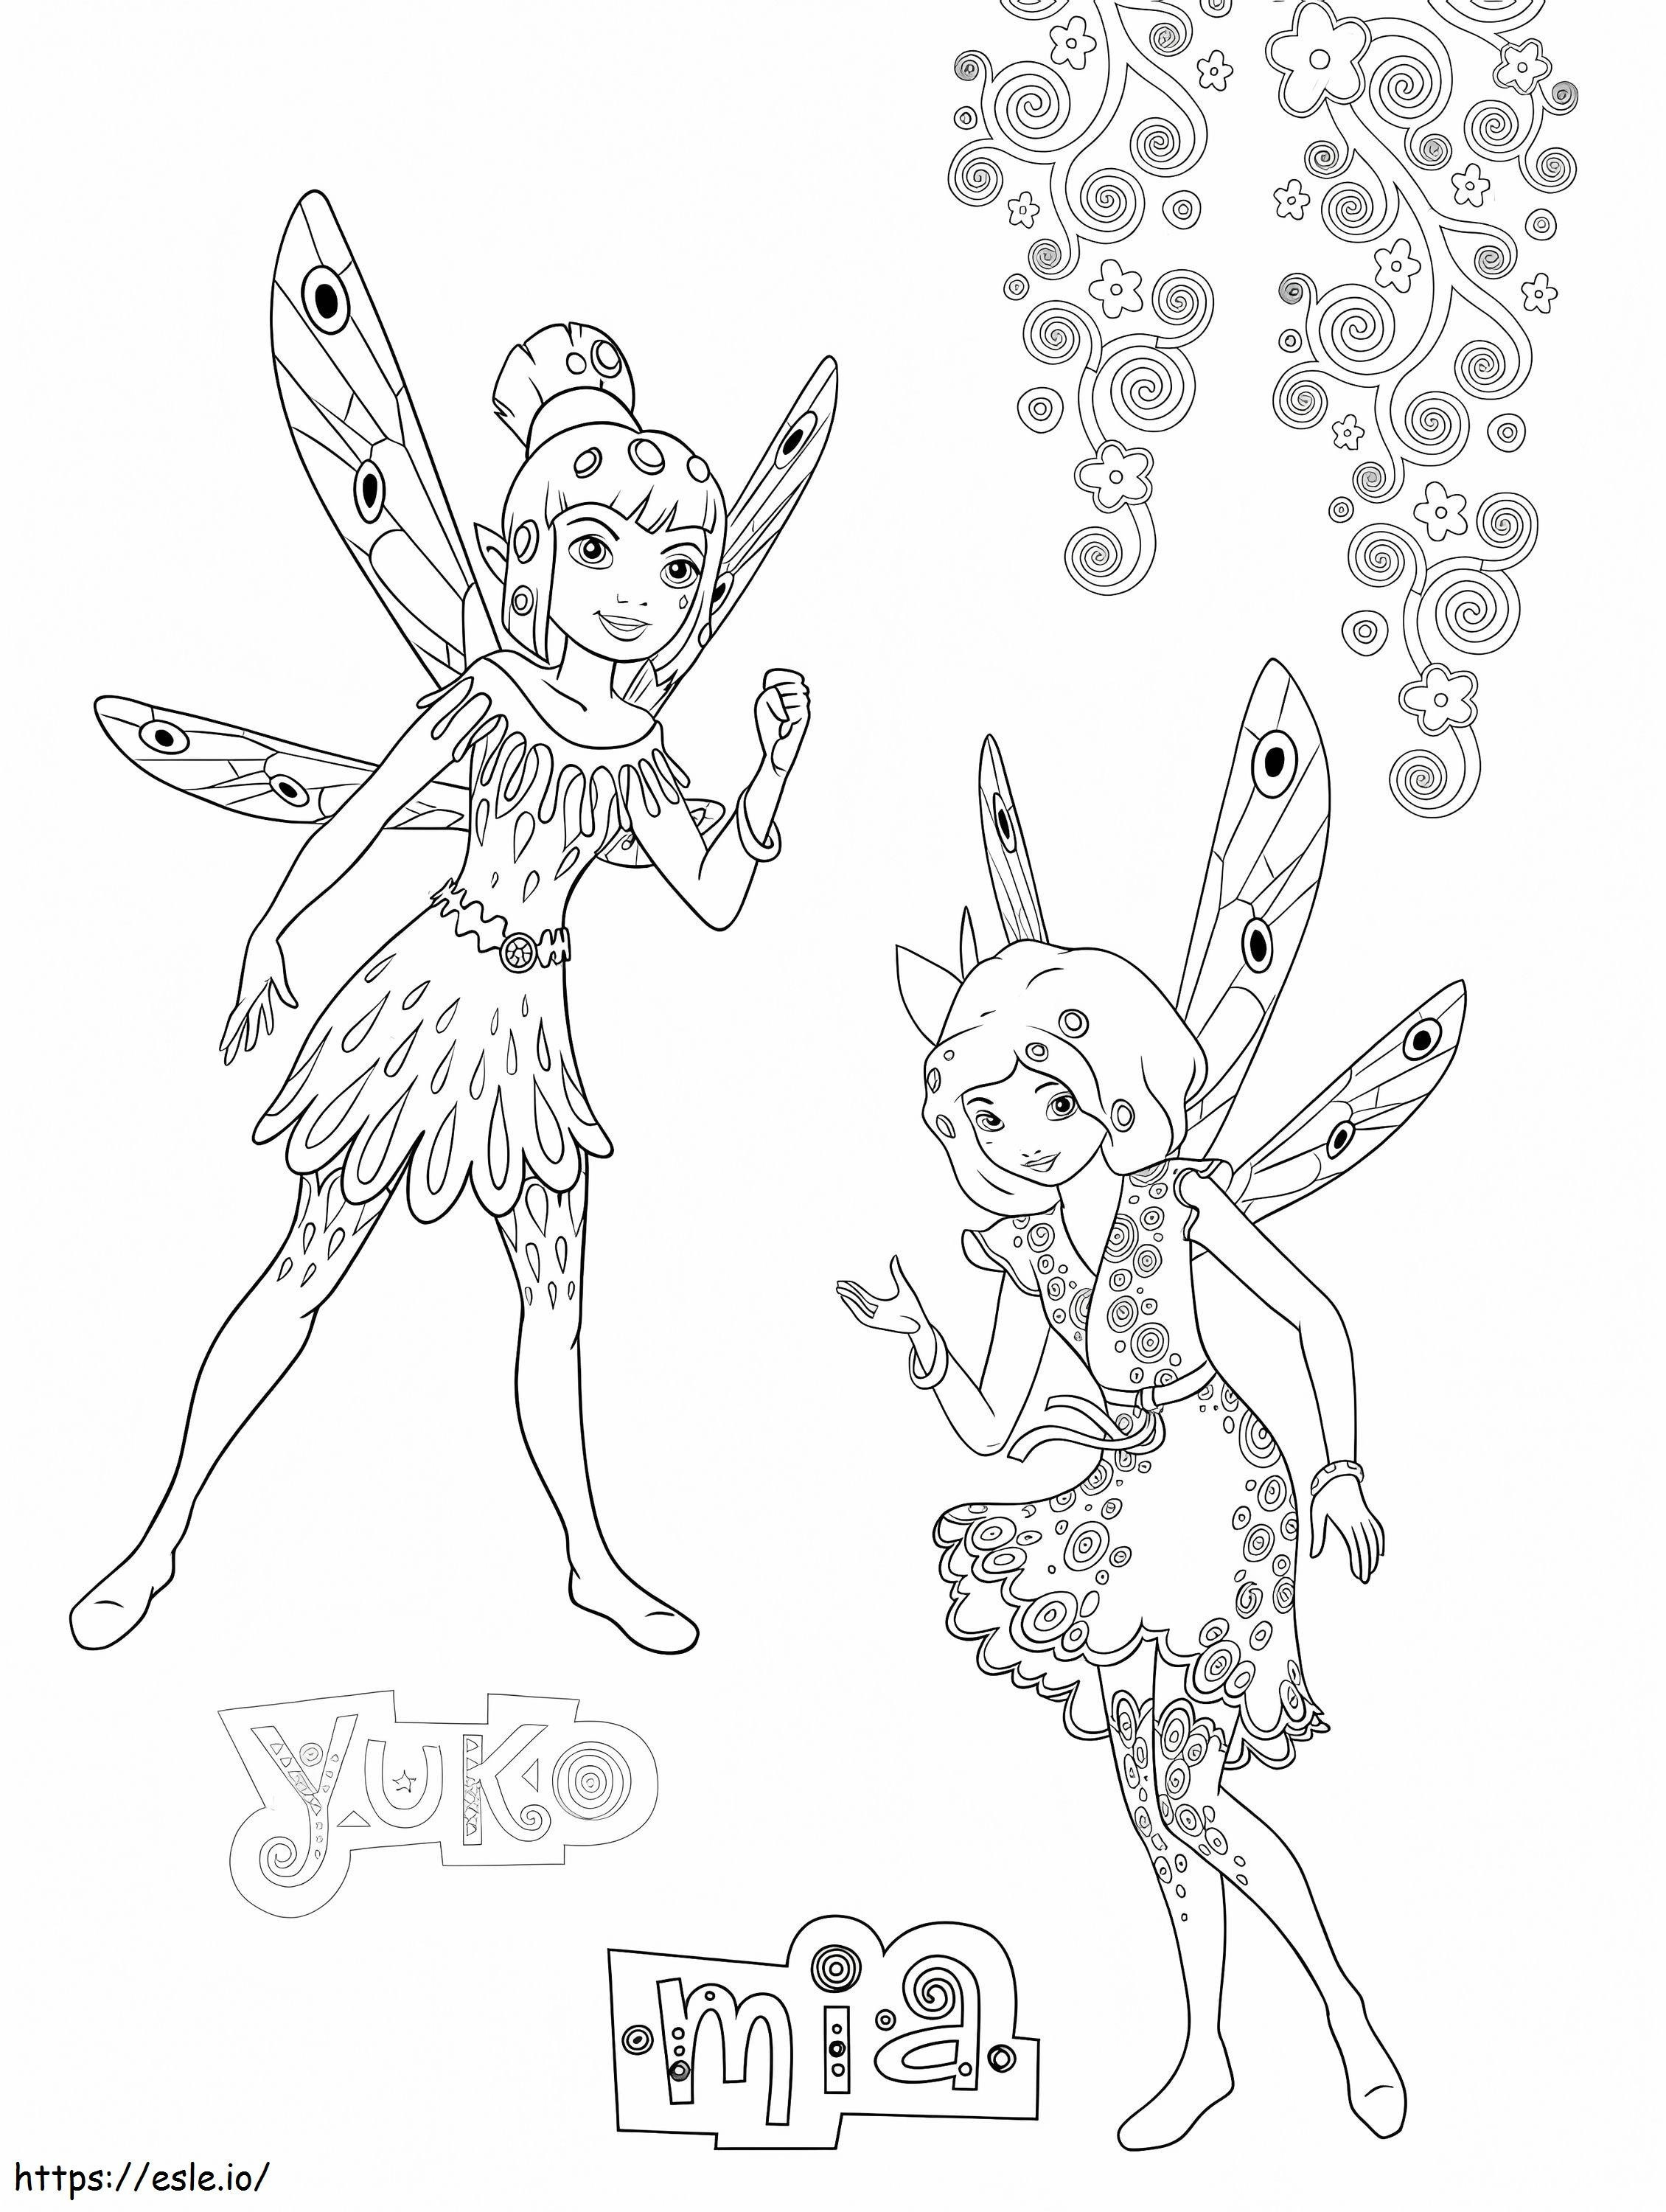 Mia And Yuko From Mia And Me coloring page